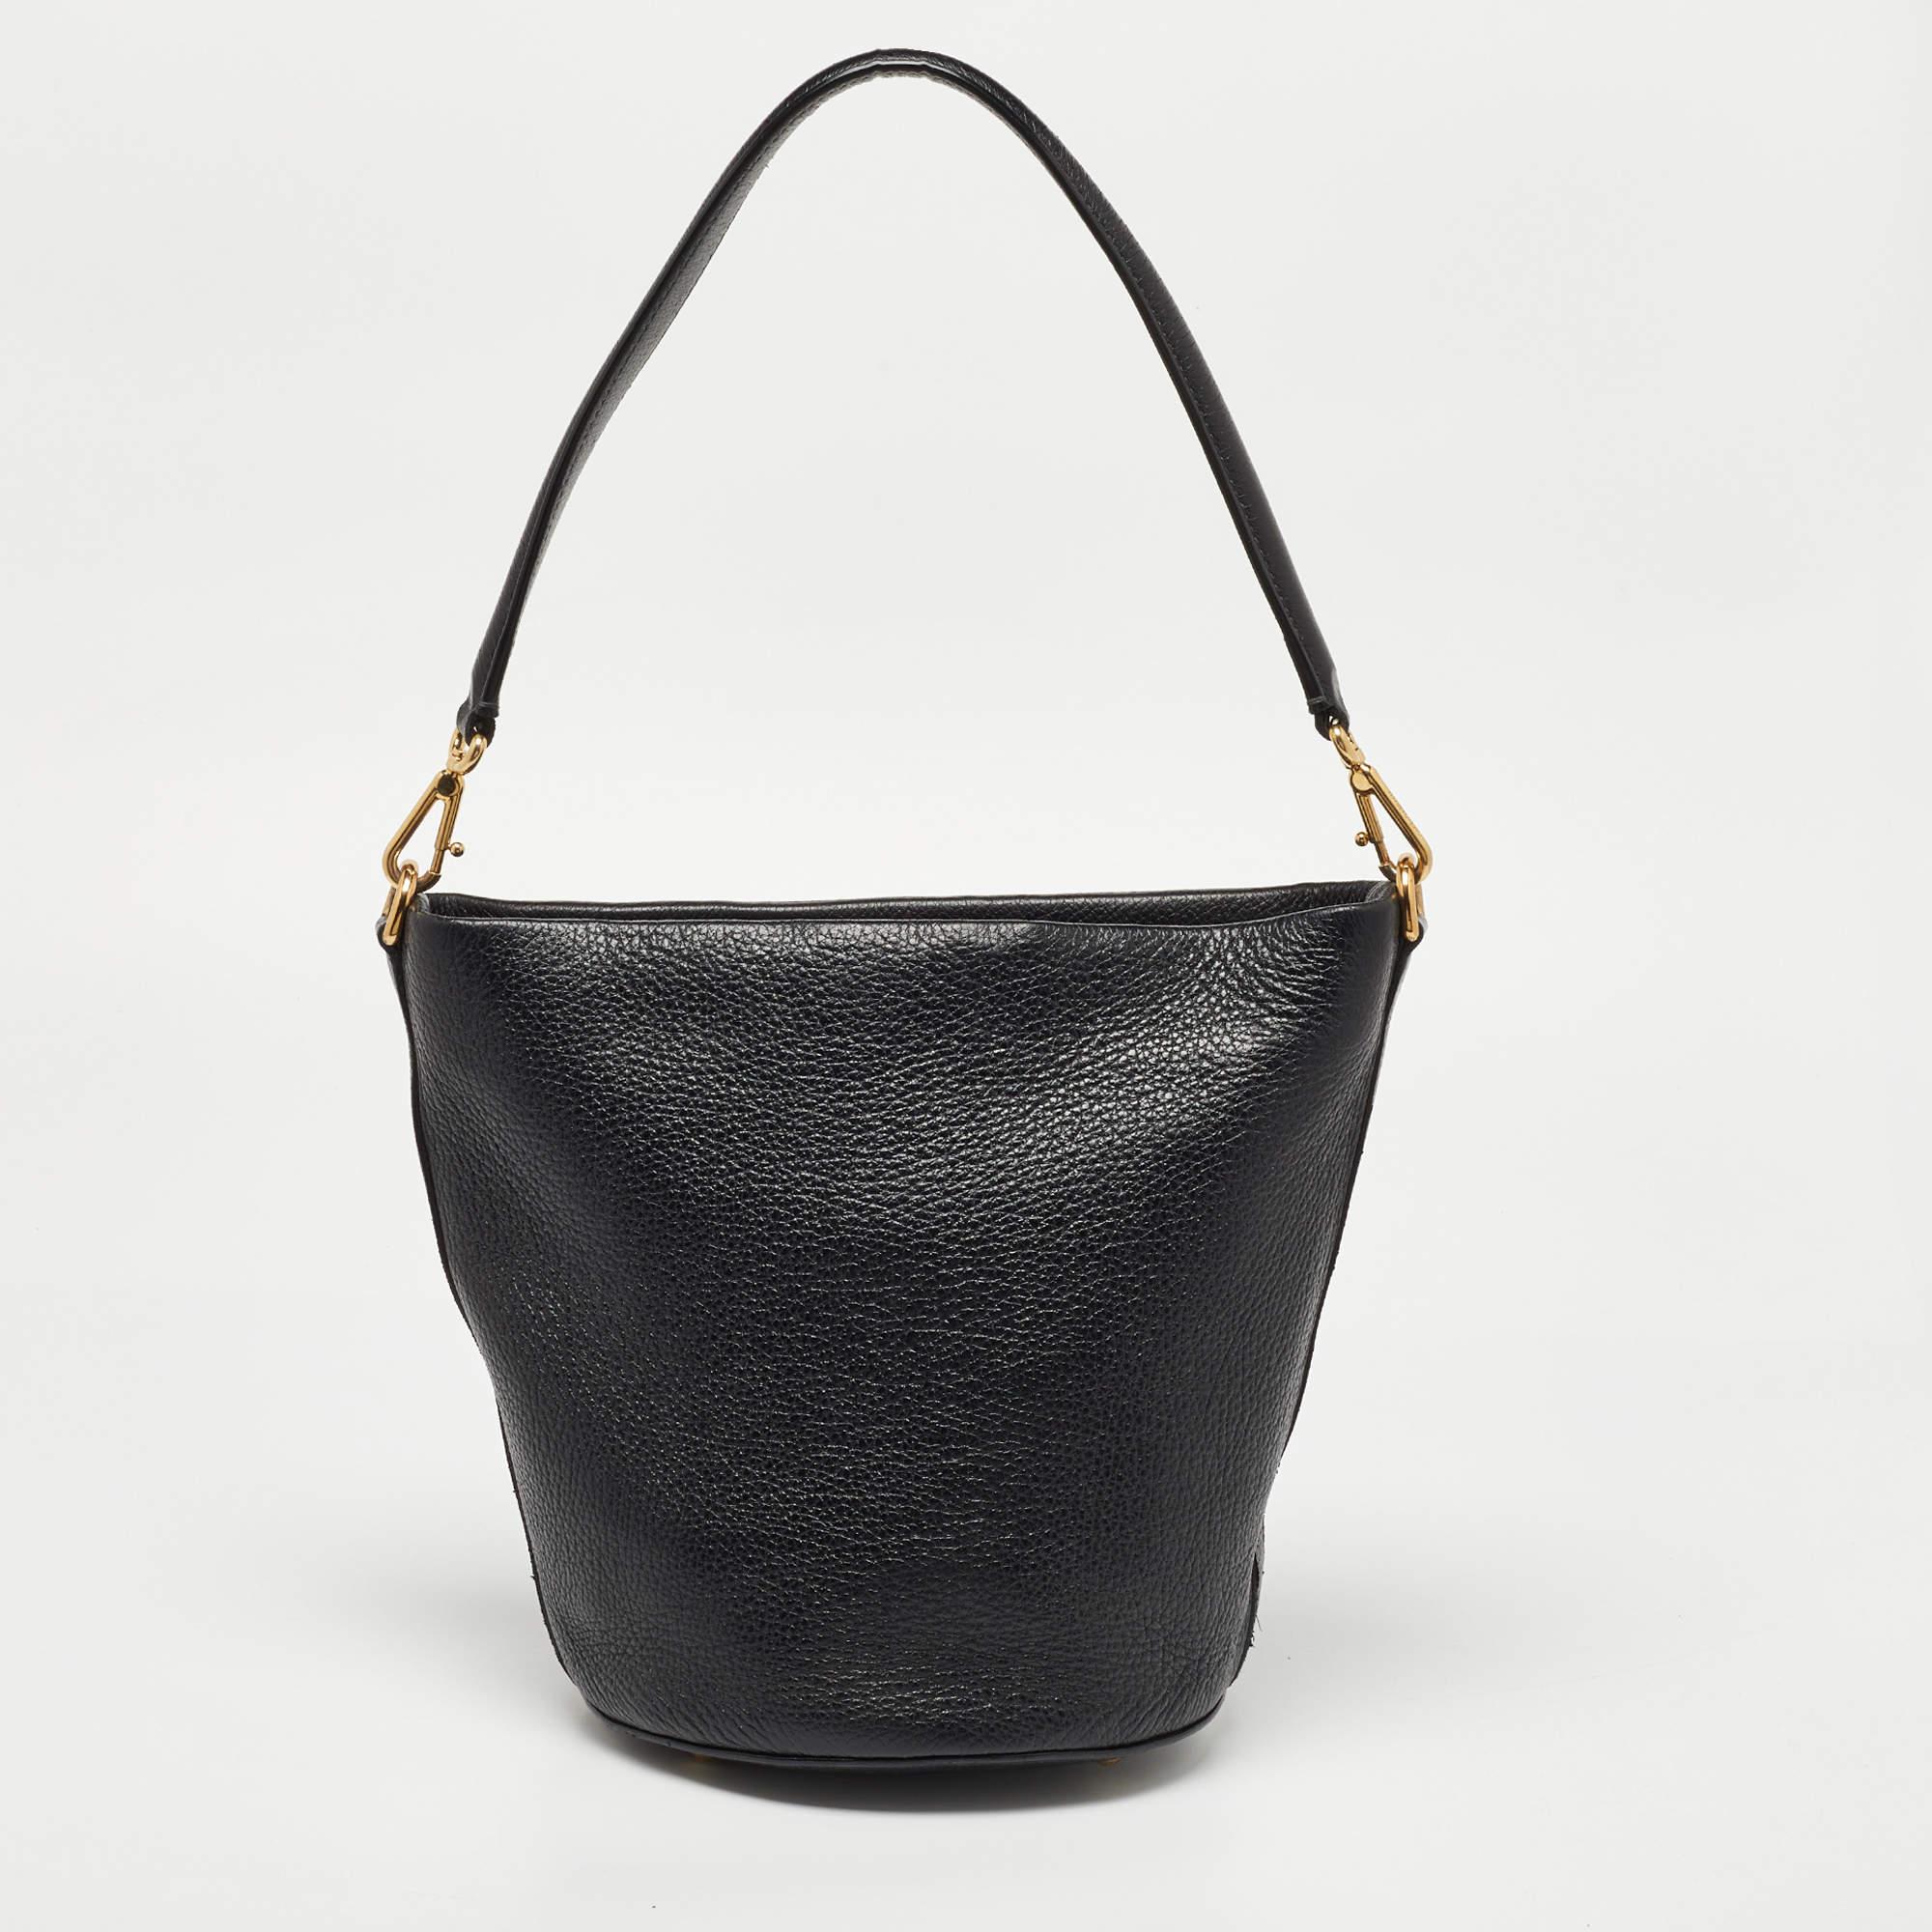 Brimming with artistry and quality craftsmanship, it is designed in a bucket silhouette, and the interior is spacious enough to hold all your essentials. This beautiful piece deserves to be carried with style by you.

